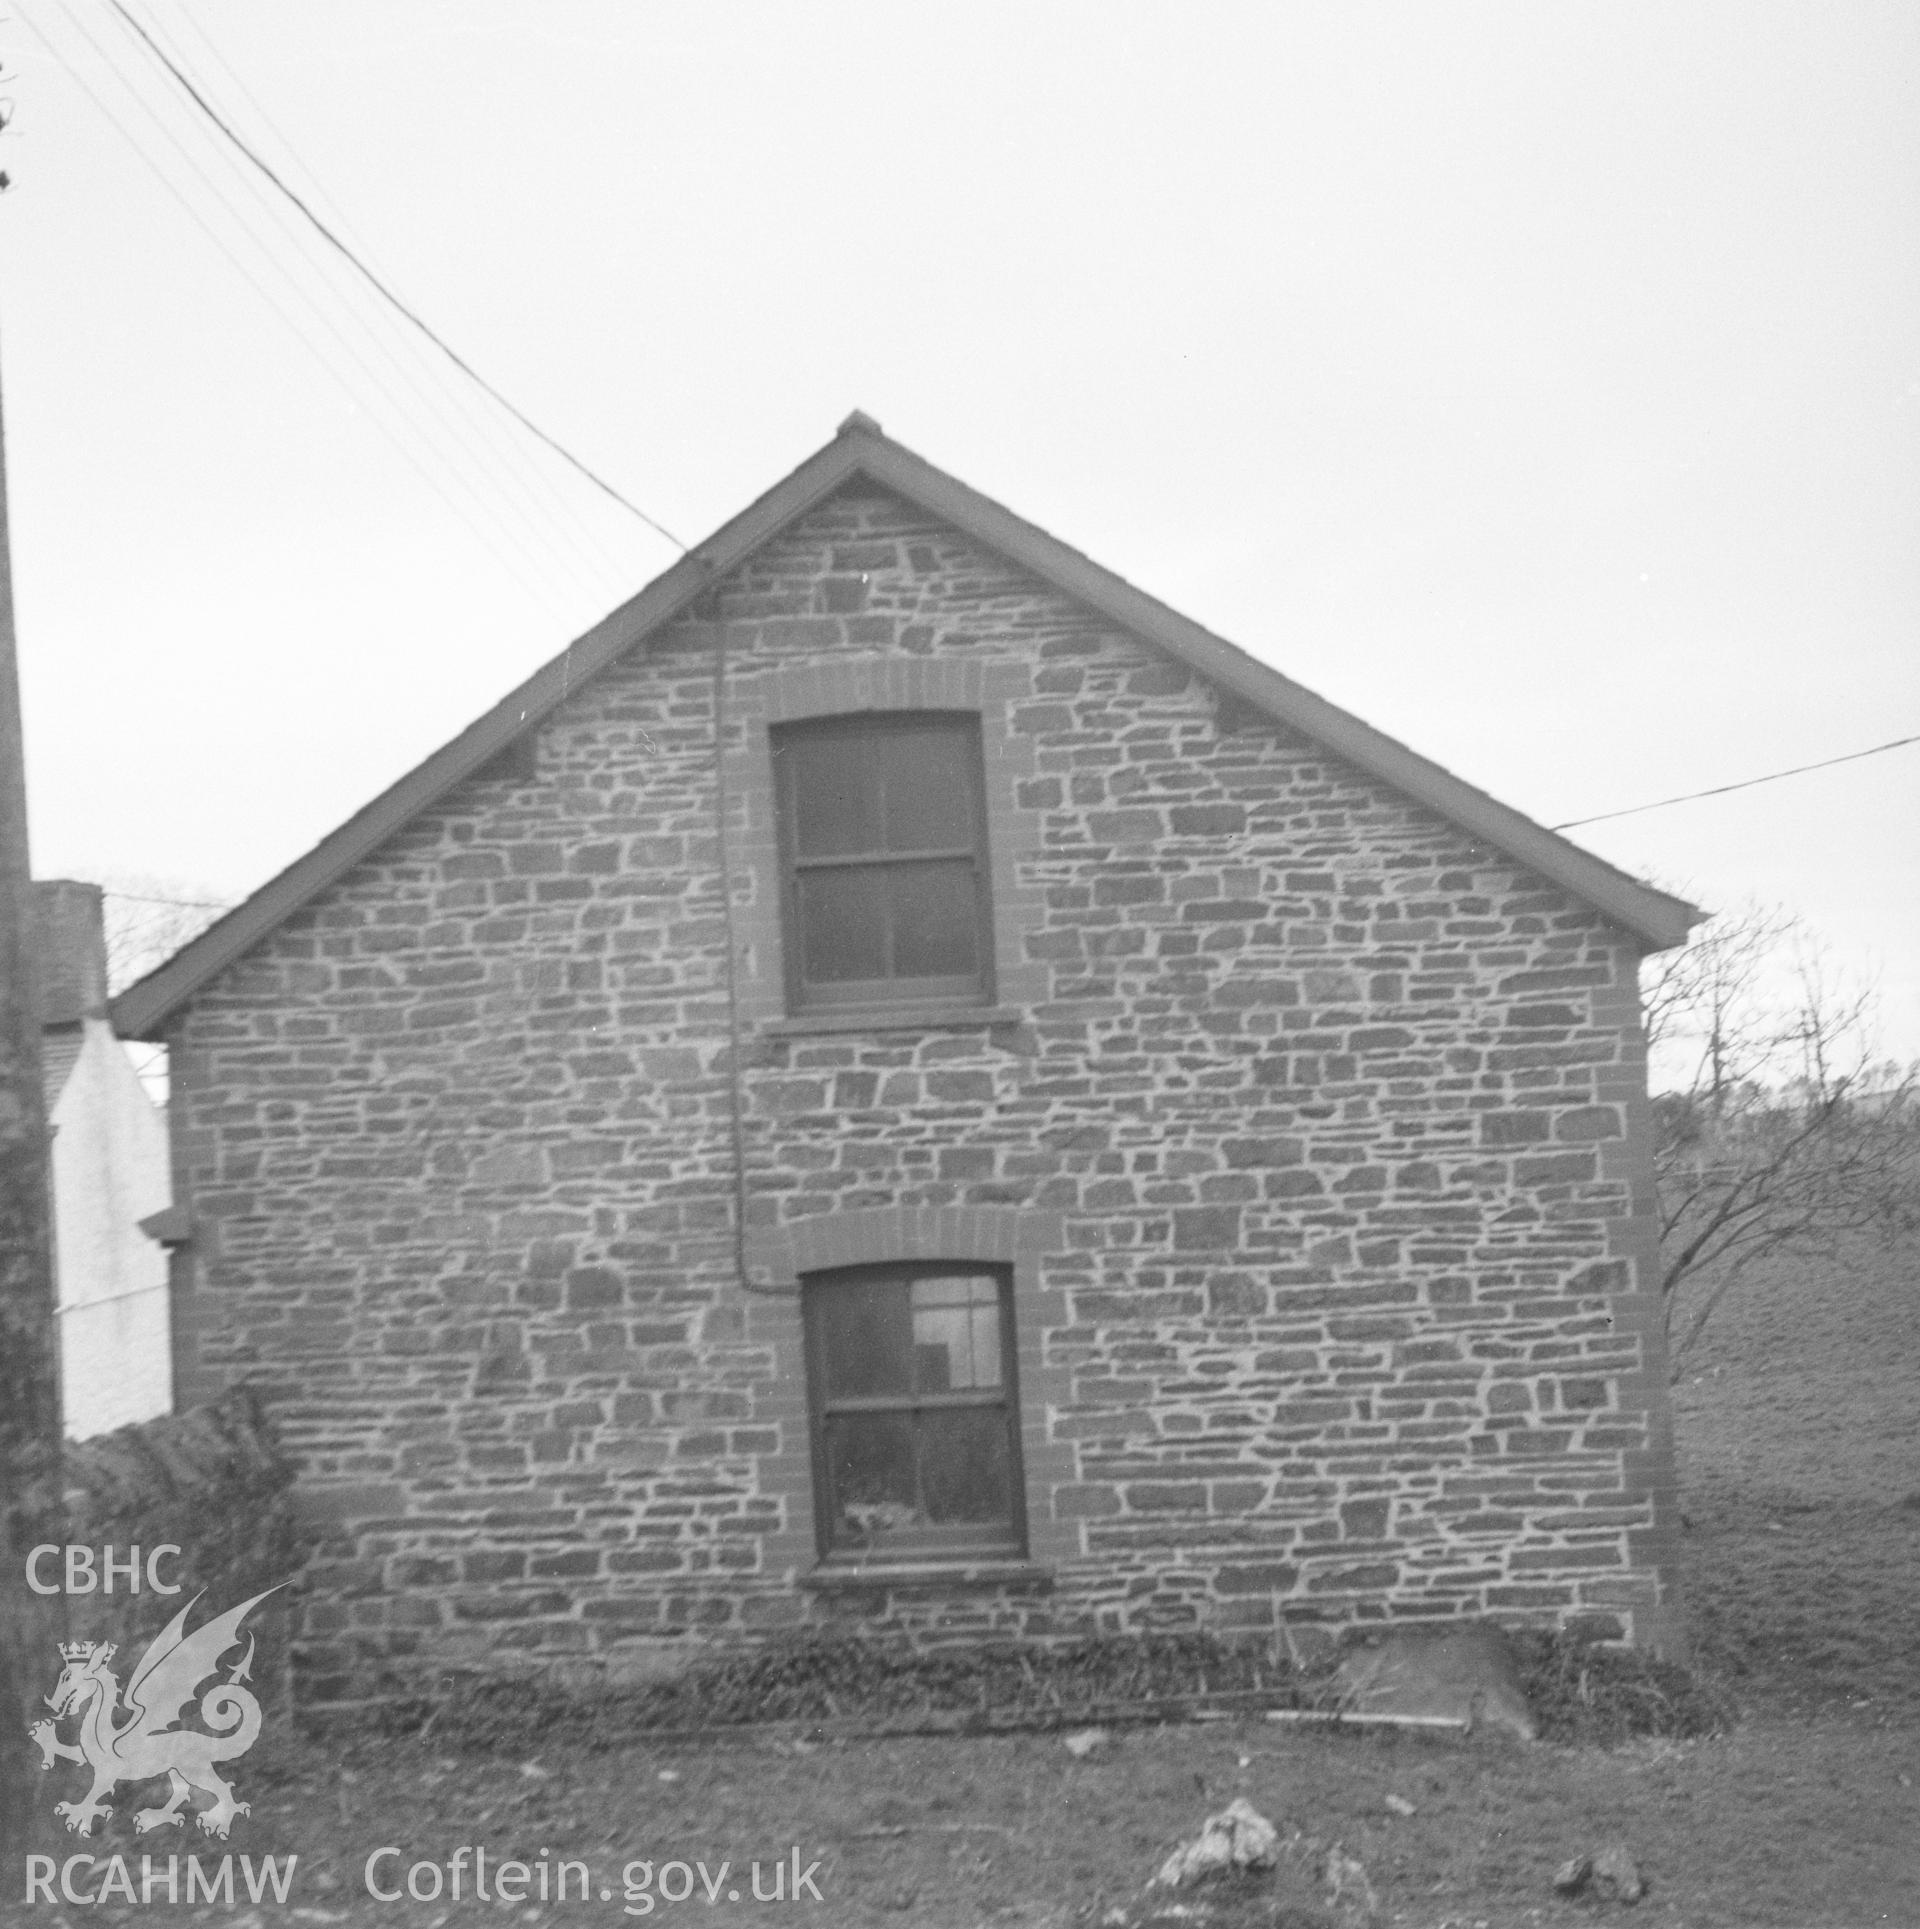 Digital copy of a black and white nitrate negative showing exterior view of outbuilding at Lluest Farm, Llanbadarn Fawr.